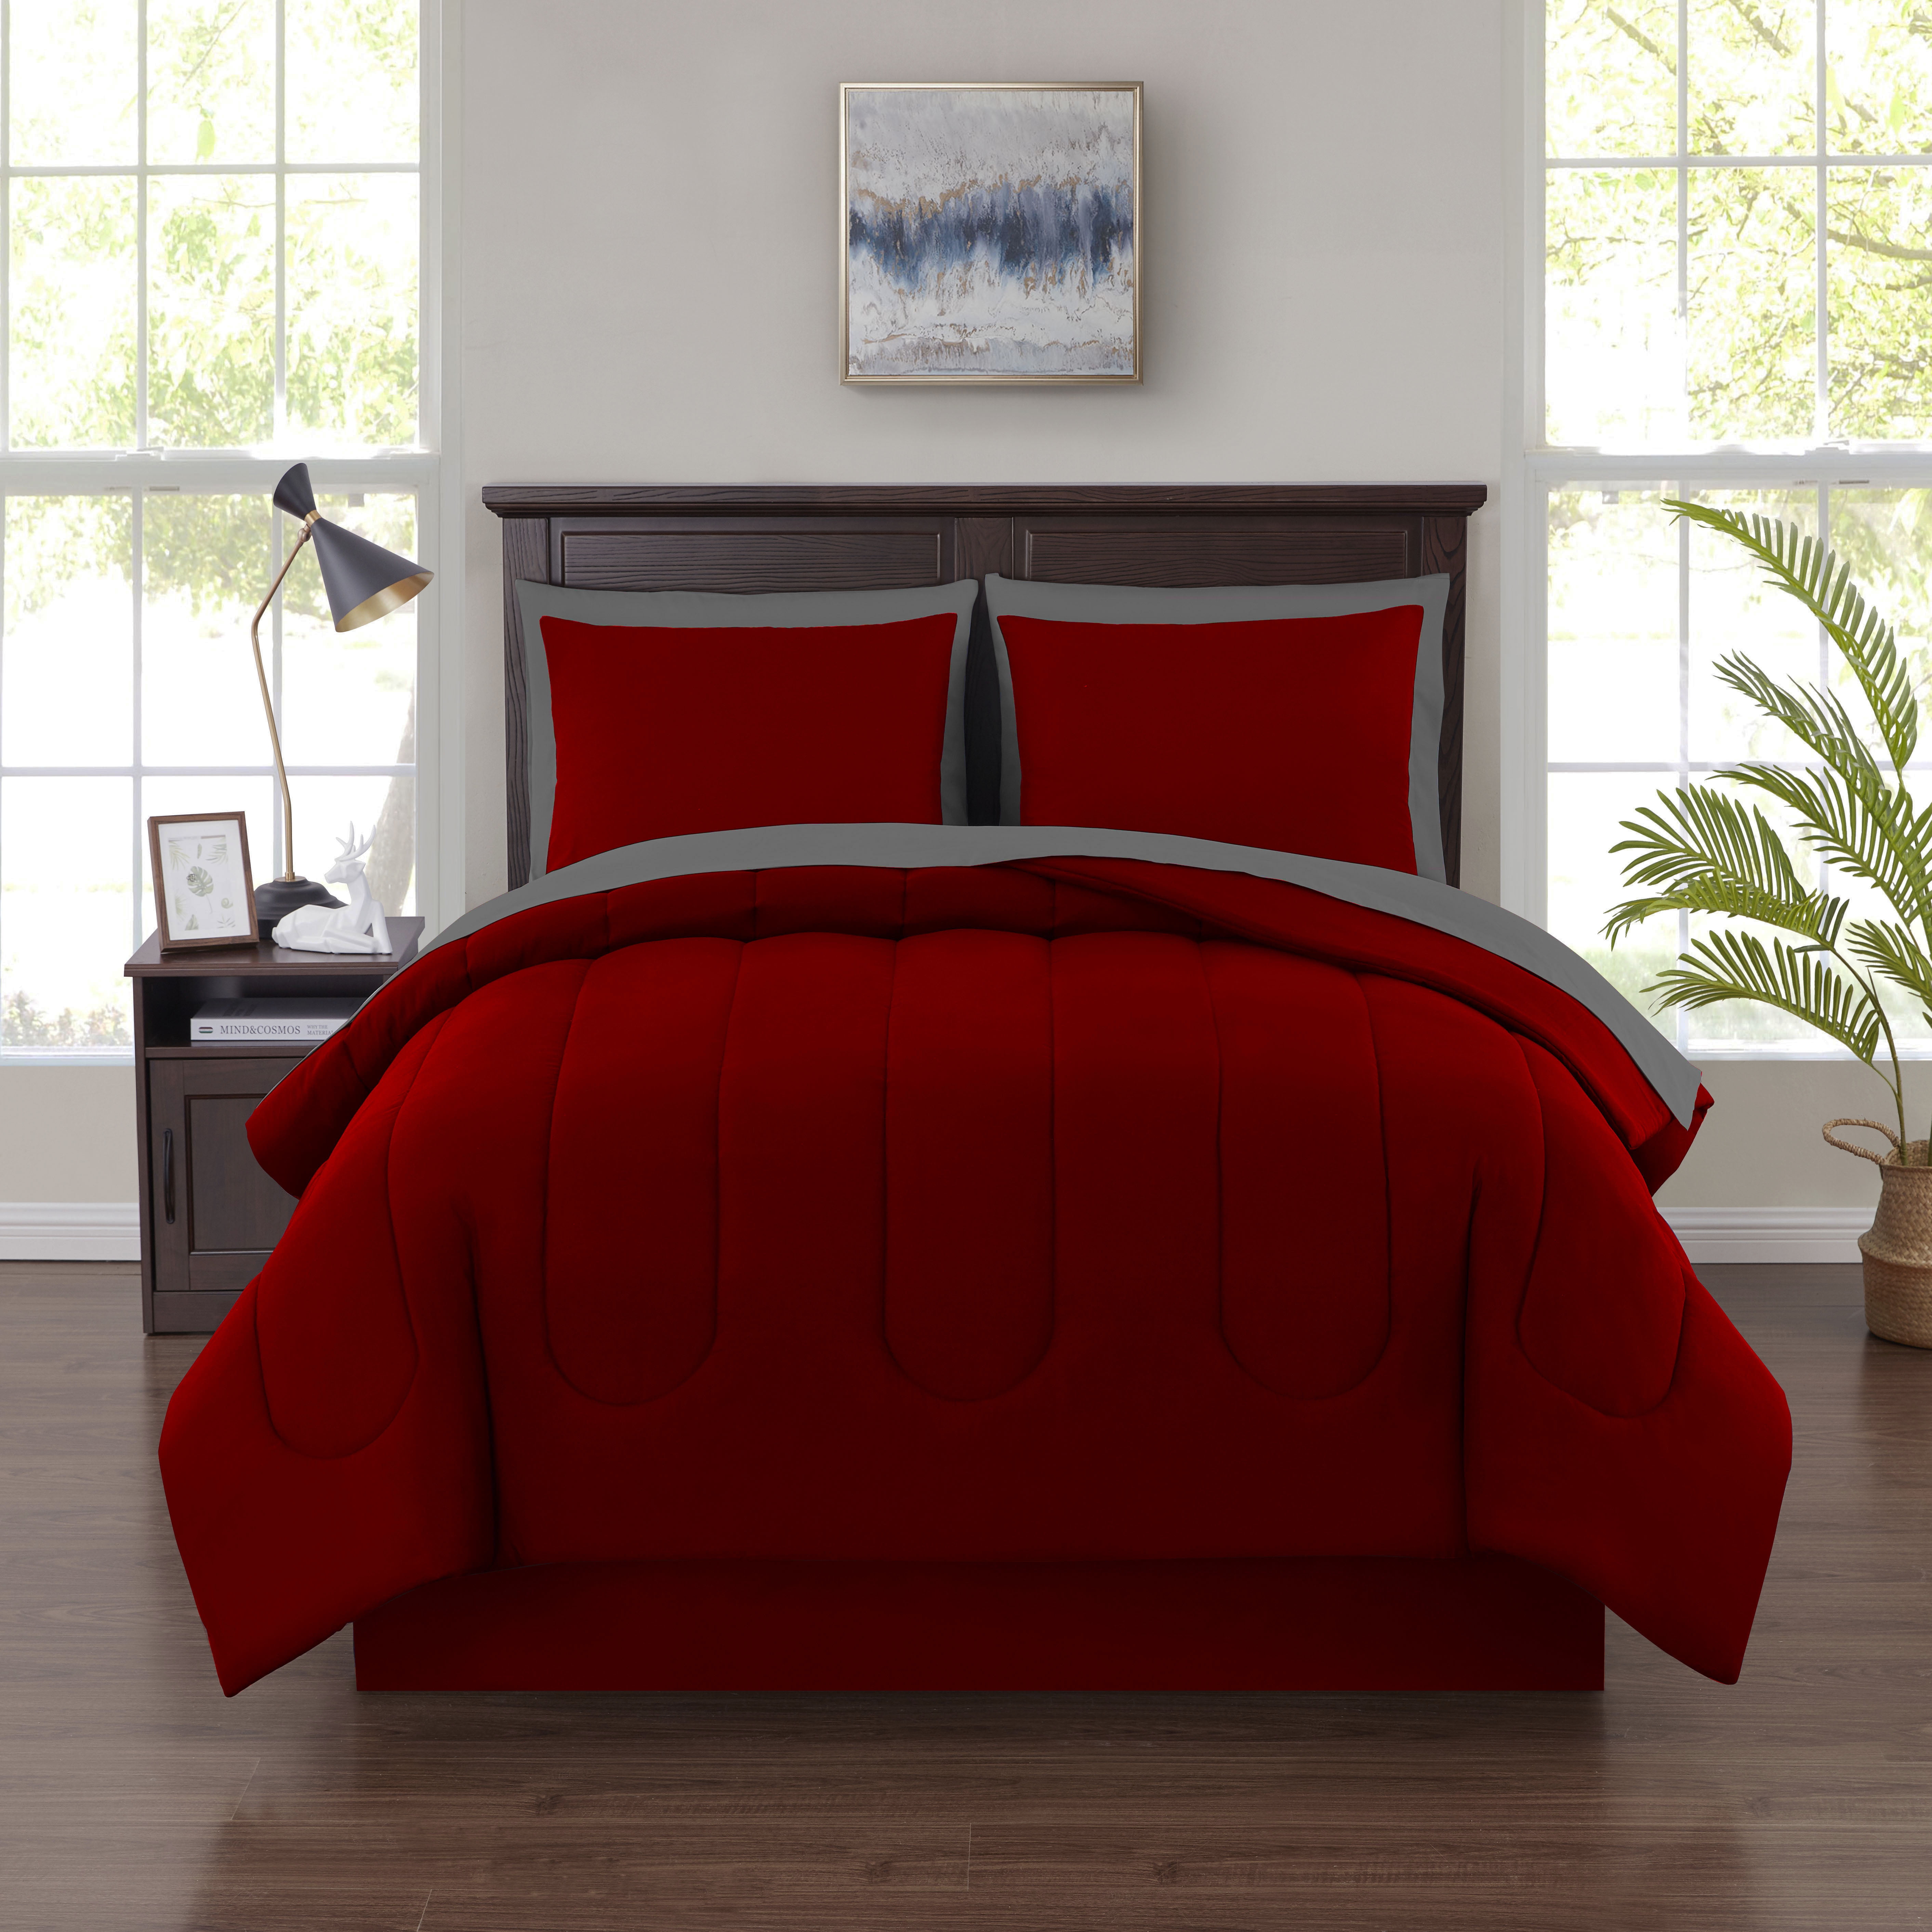 Mainstays 6 Piece Red Bed In A Bag, Red Twin Bed